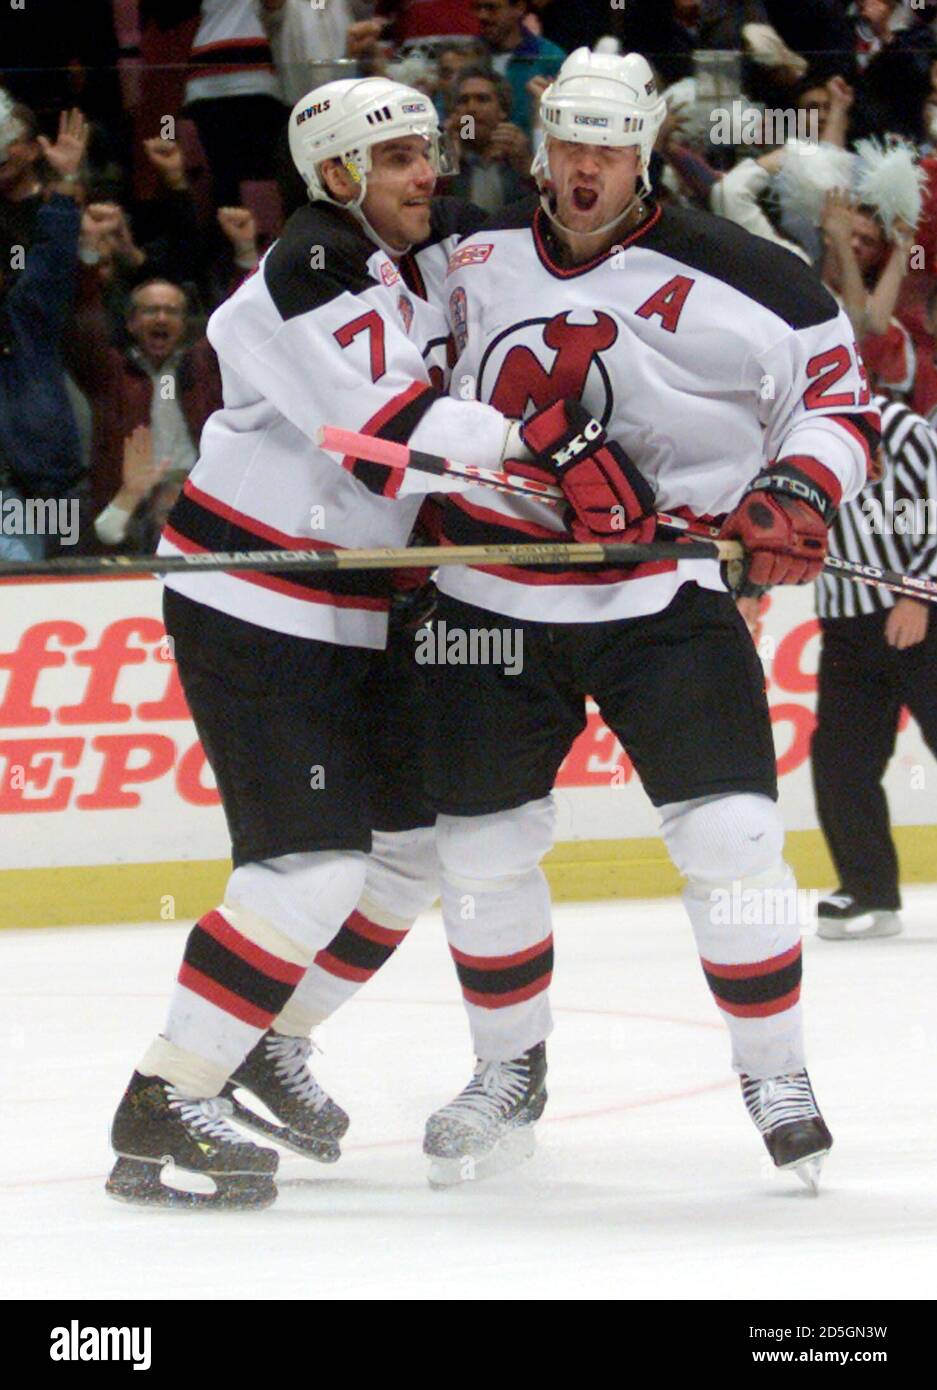 New Jersey Devils' center Jason Arnott (R) celebrates his first period goal  against the Dallas Stars with his teammate Vladimir Bombardir in Game 1 of  the 2000 Stanley Cup, at Meadowlands Arena